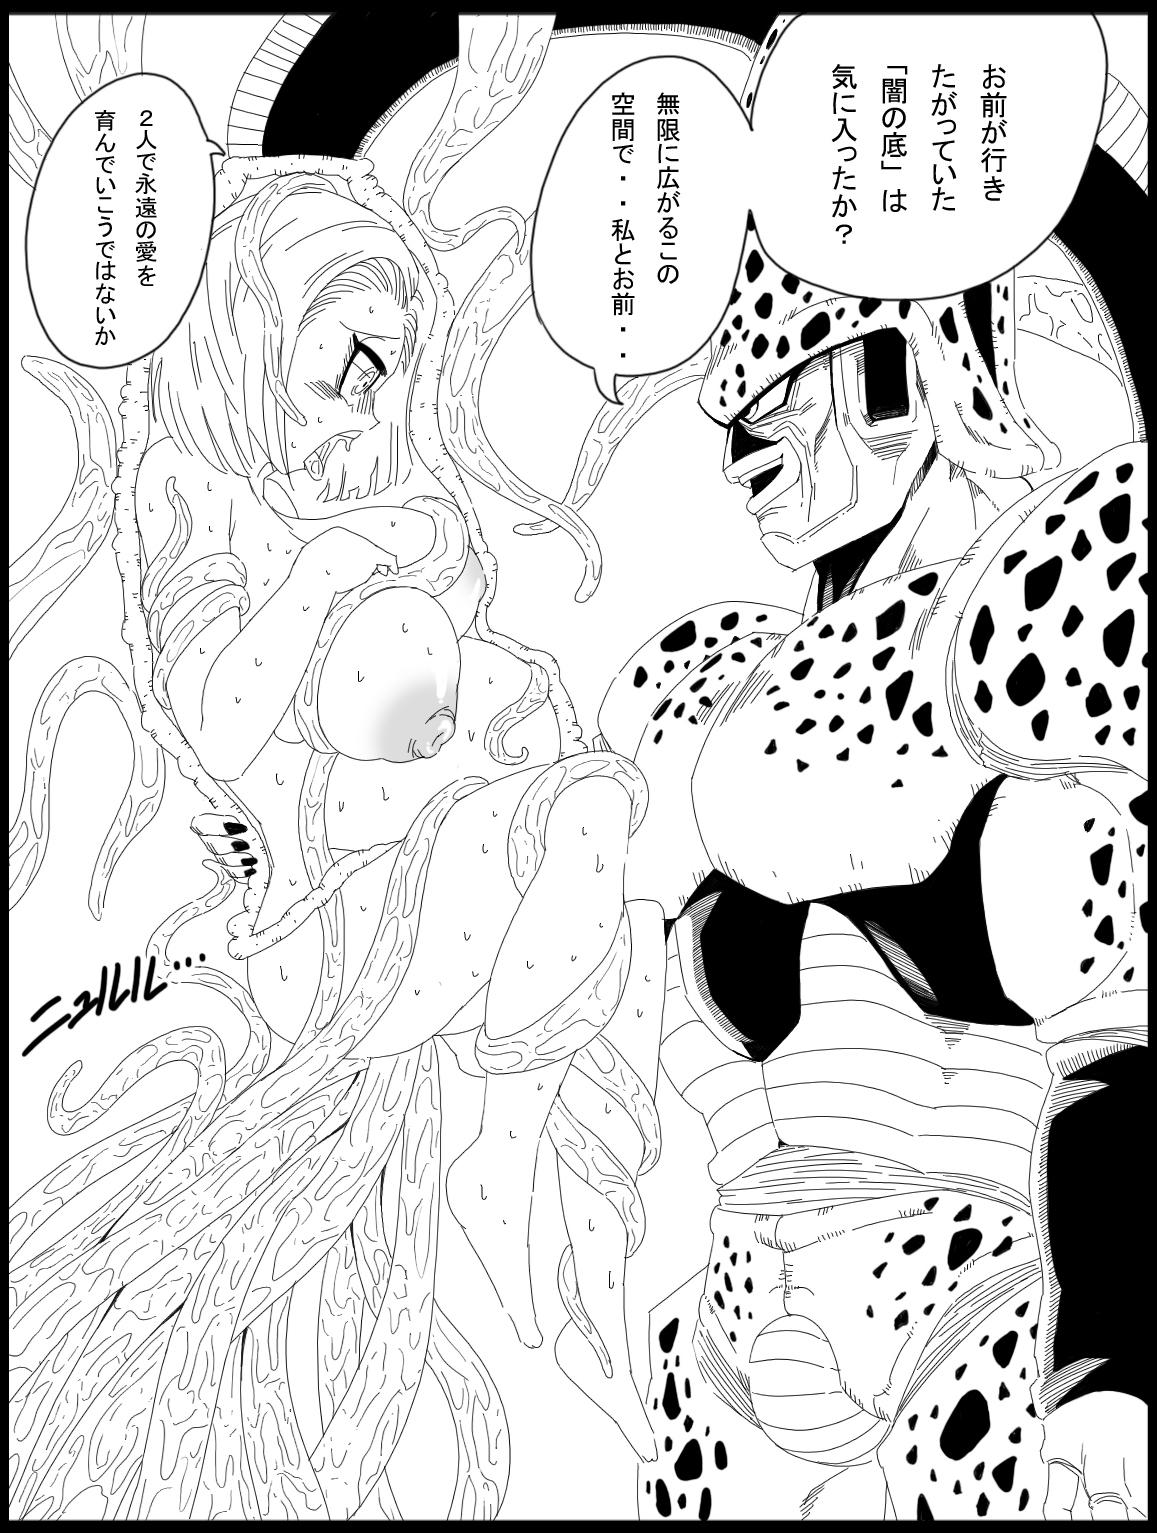 Ass Fuck Dragon Road 14 - Dragon ball z Domination - Page 11